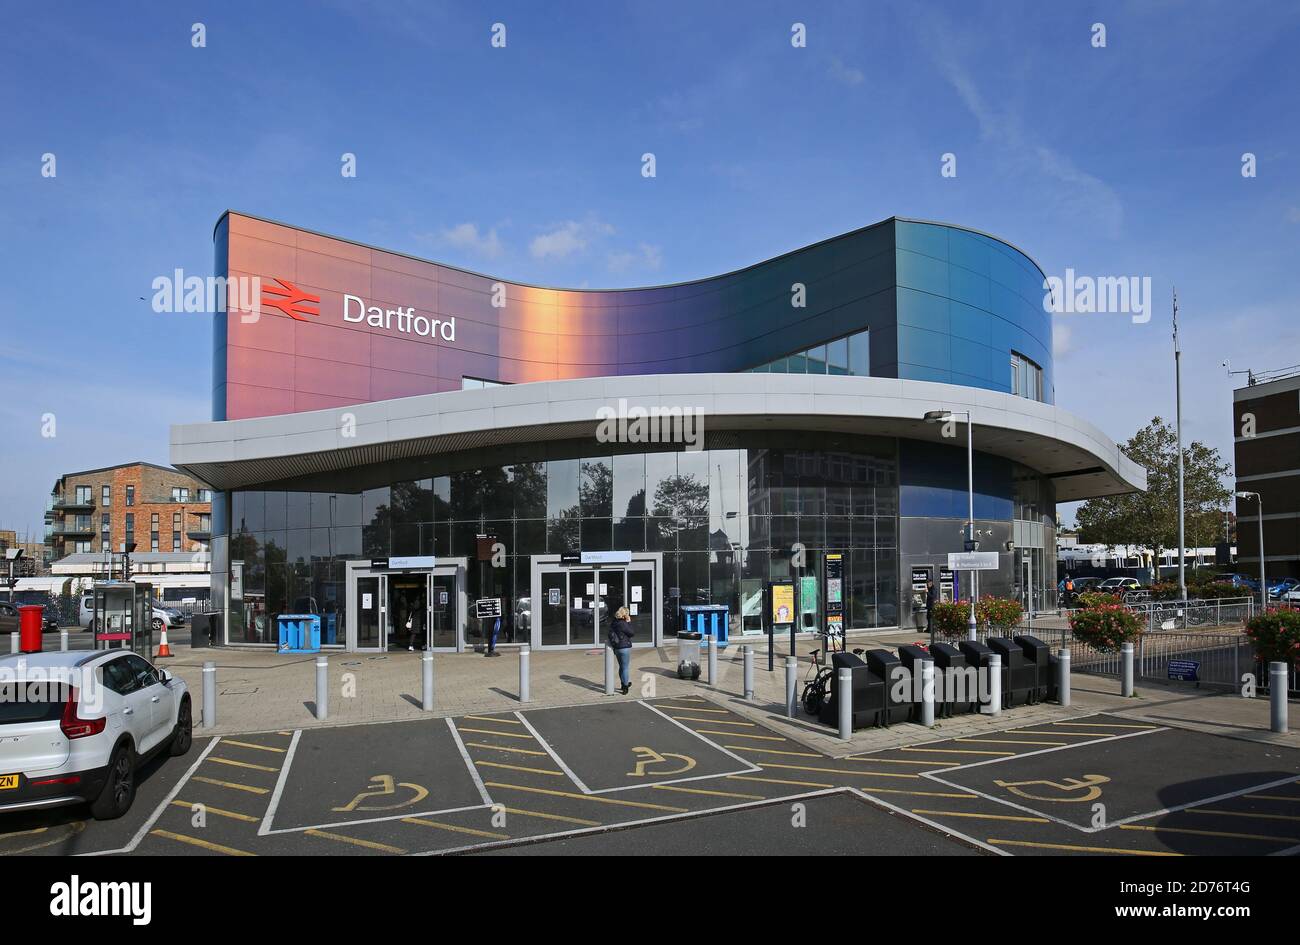 The new Dartford railway station - main building, London, UK. Opened in 2013, designed by RKG Partnership Stock Photo